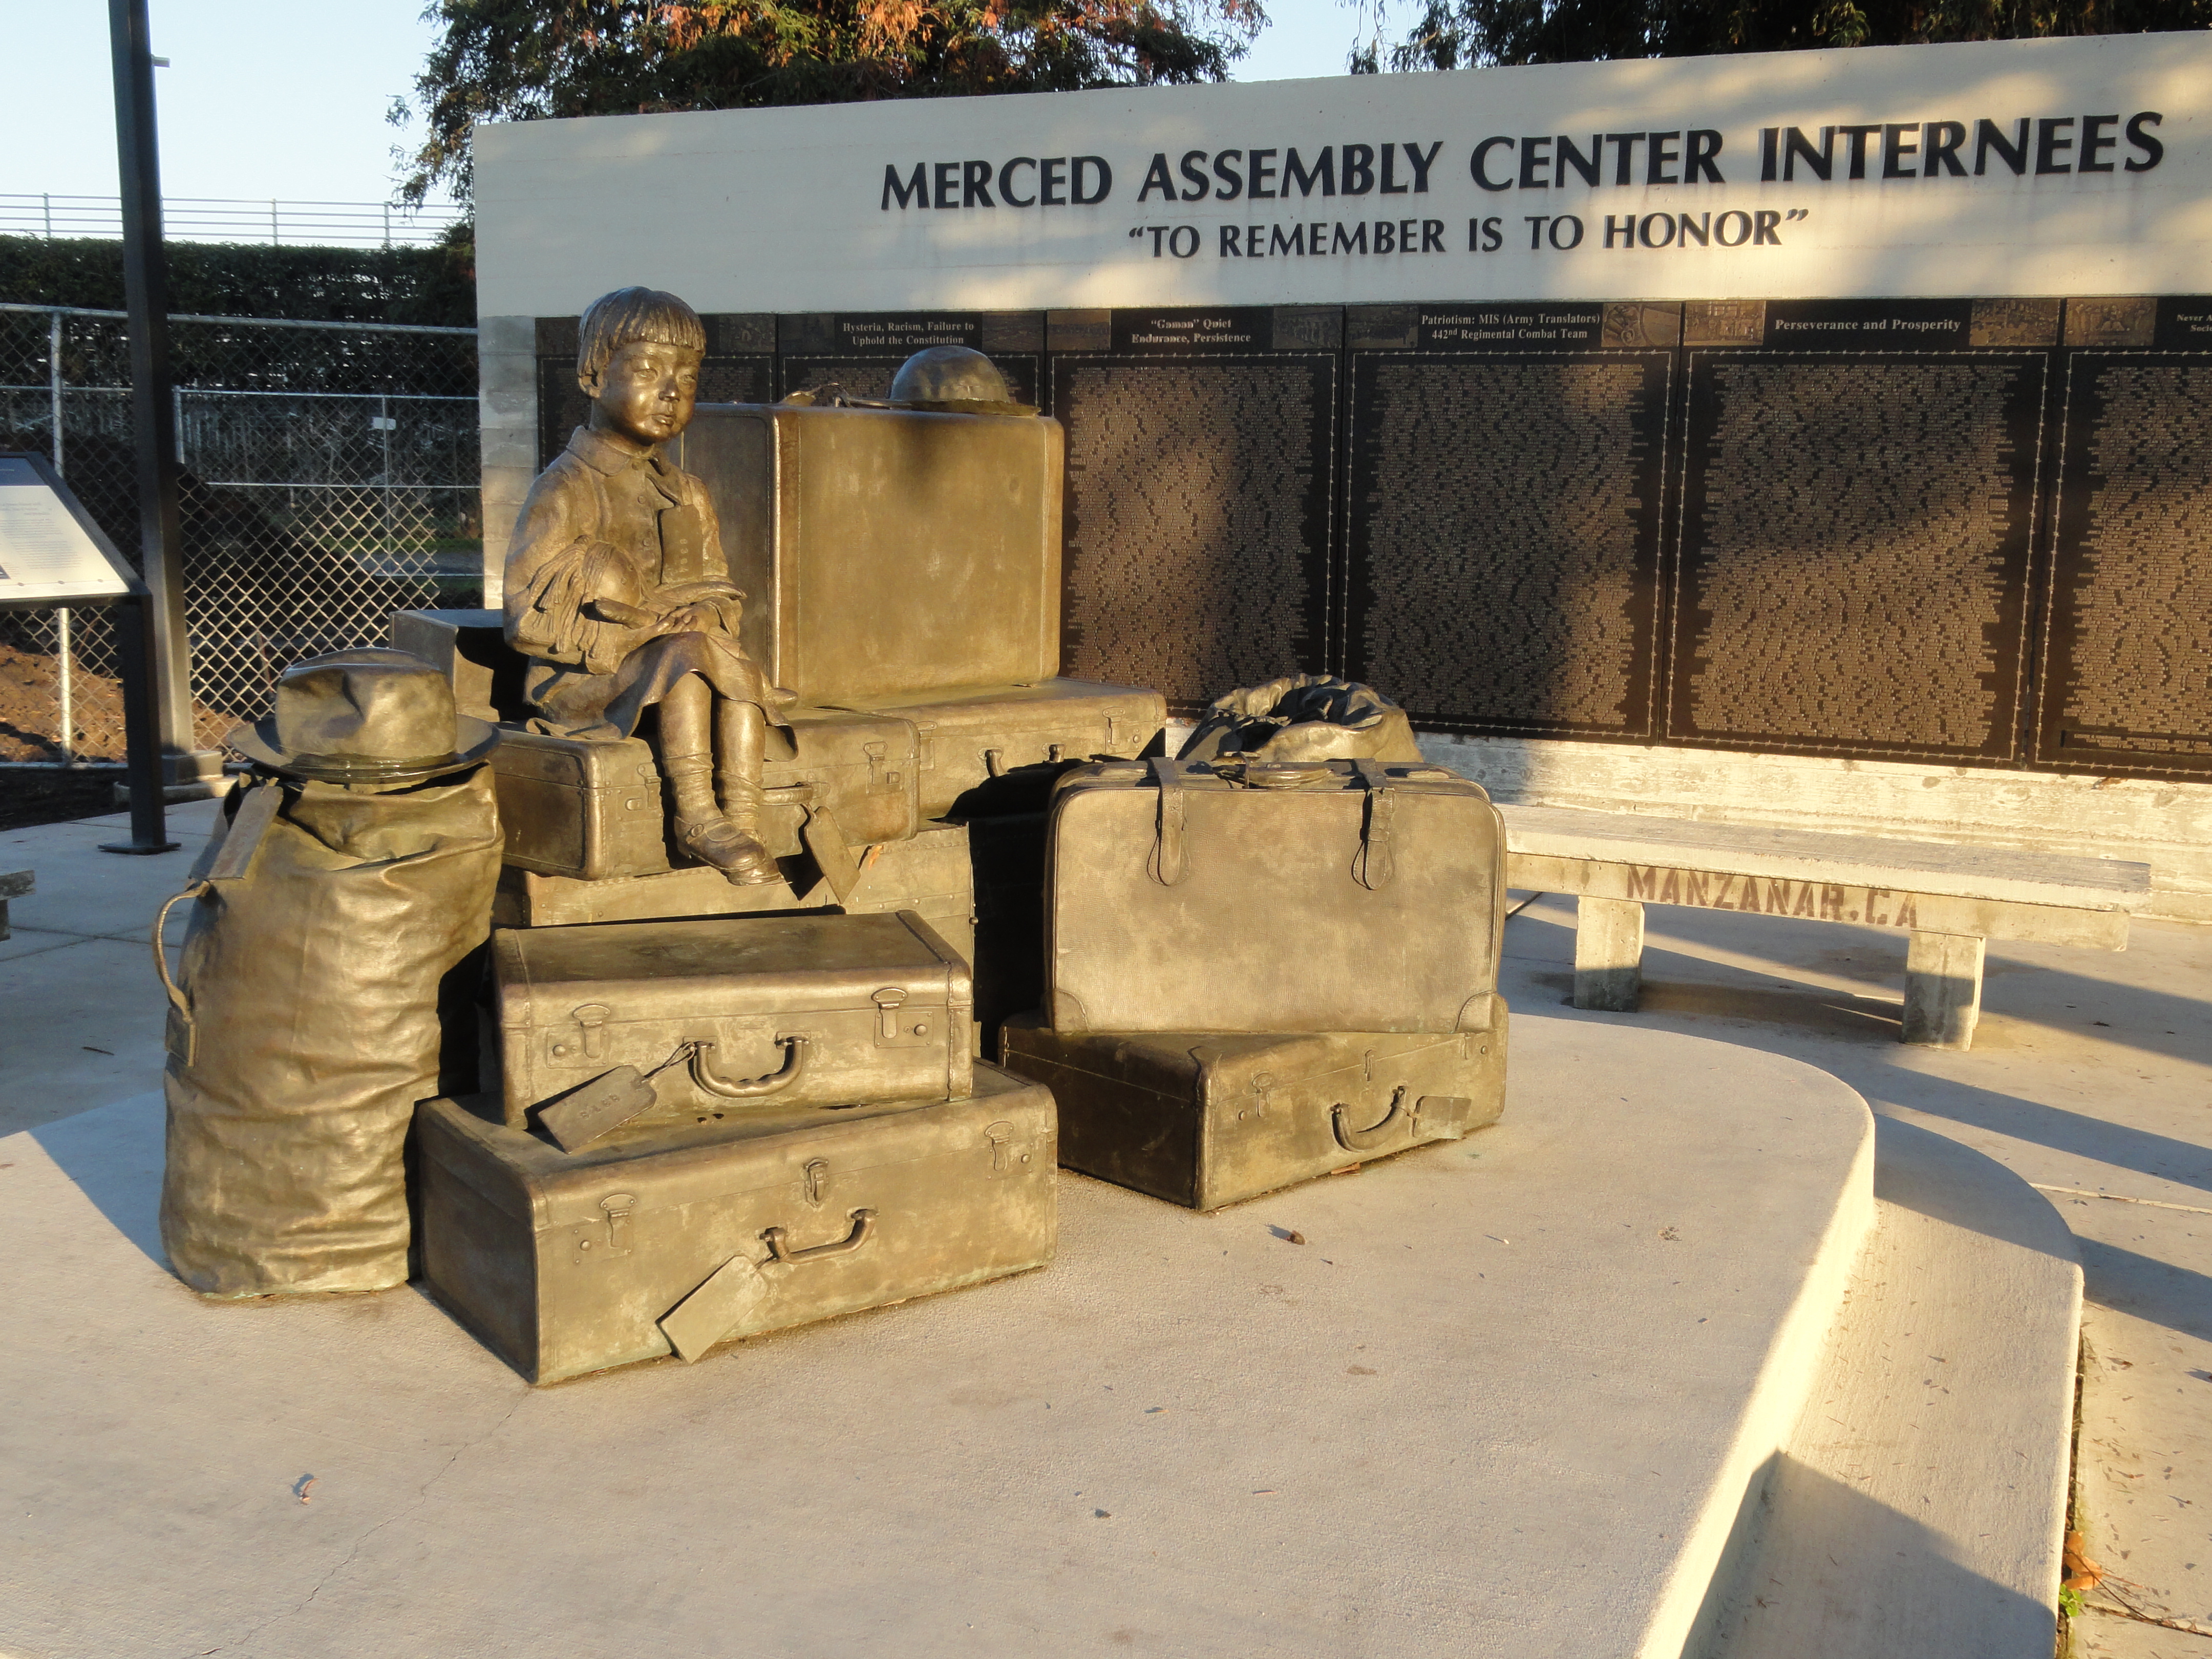 Merced Assembly Center Memorial. Photo by Kirsten Leong.